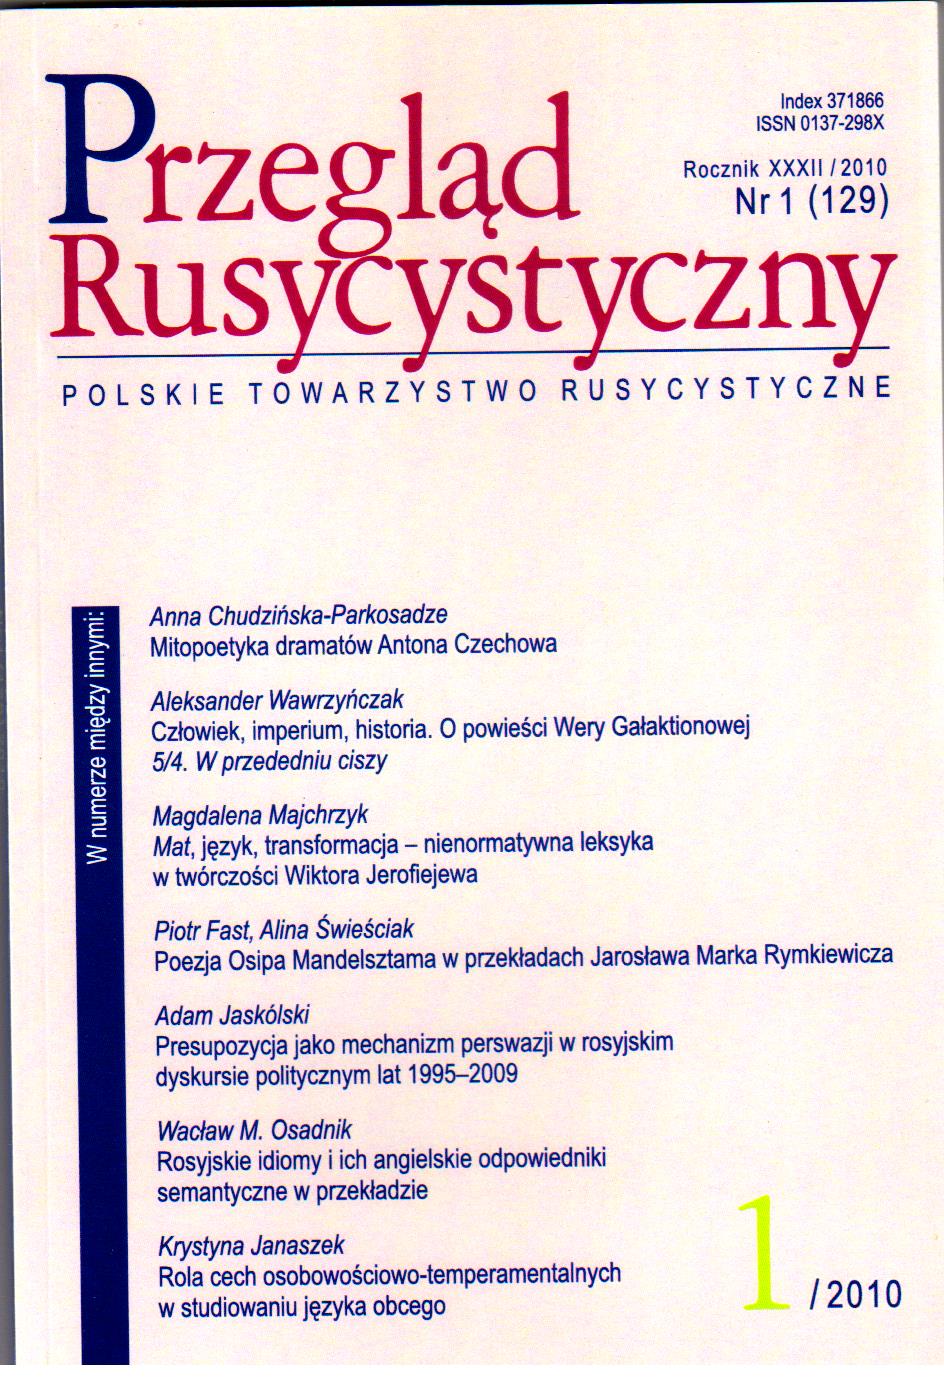 Presupposition as a means of persuasion in Russian political discourse in the period 1995-2009 Cover Image